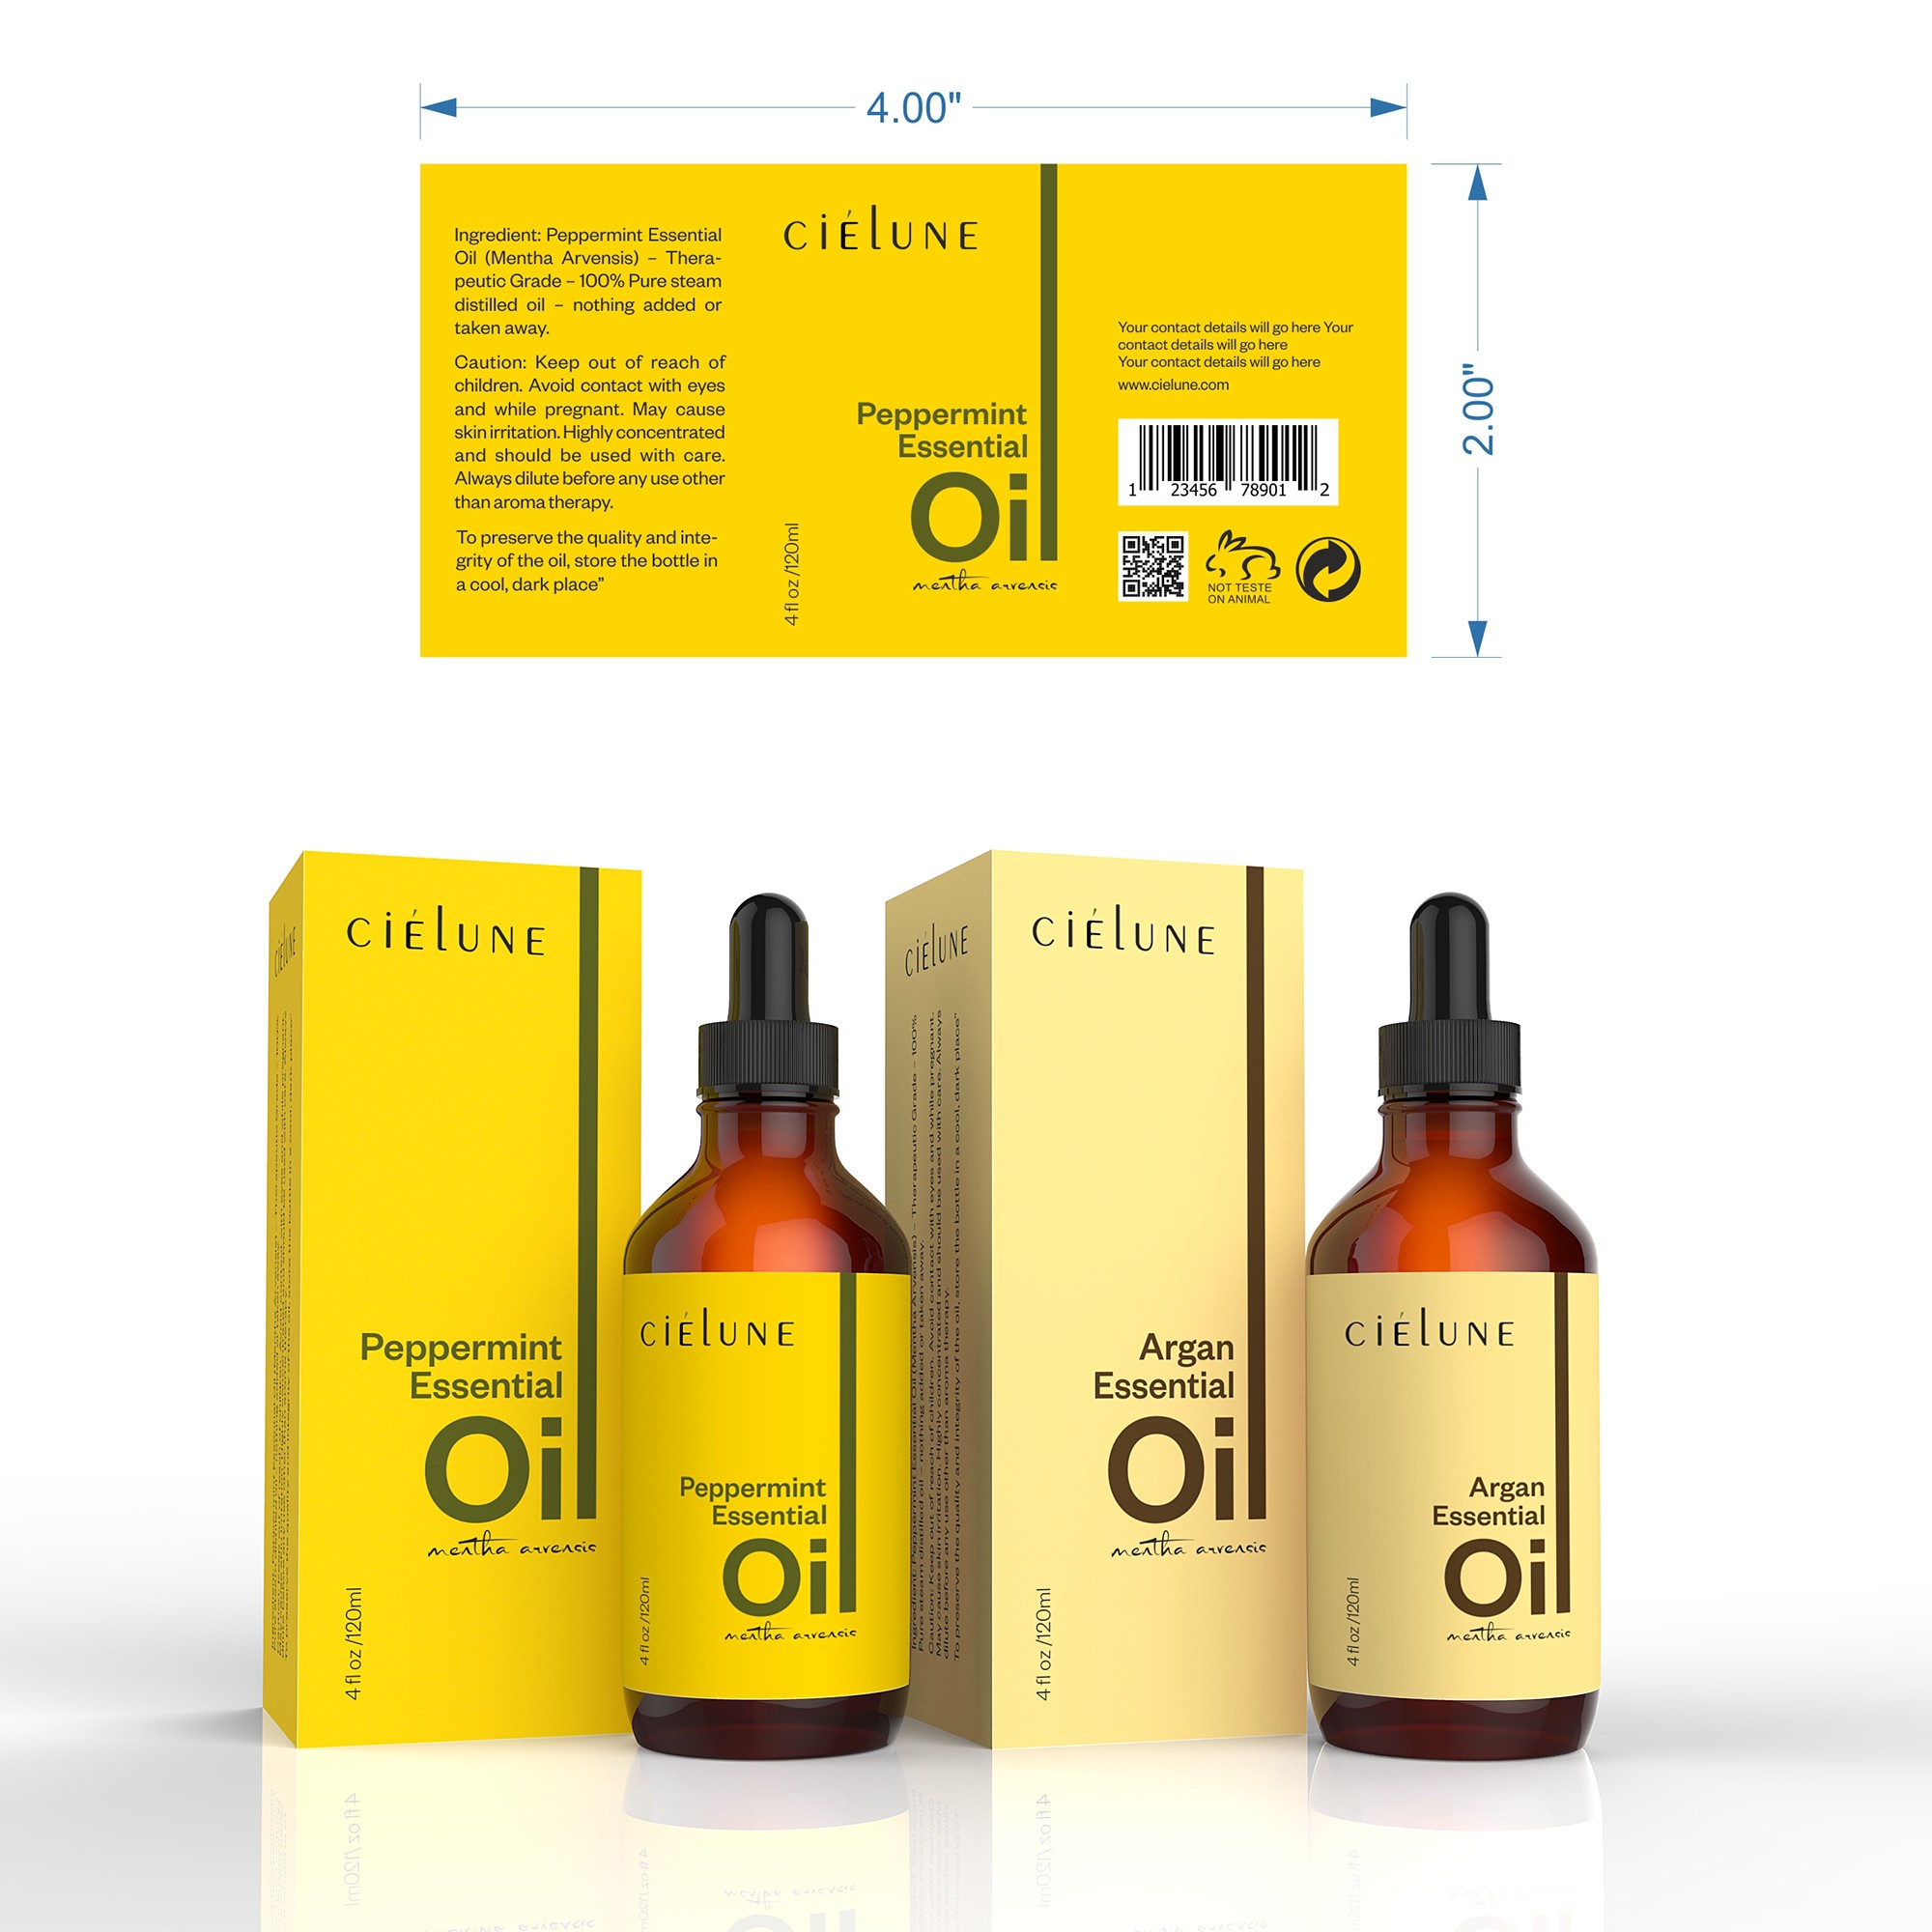 cosmetic label design software